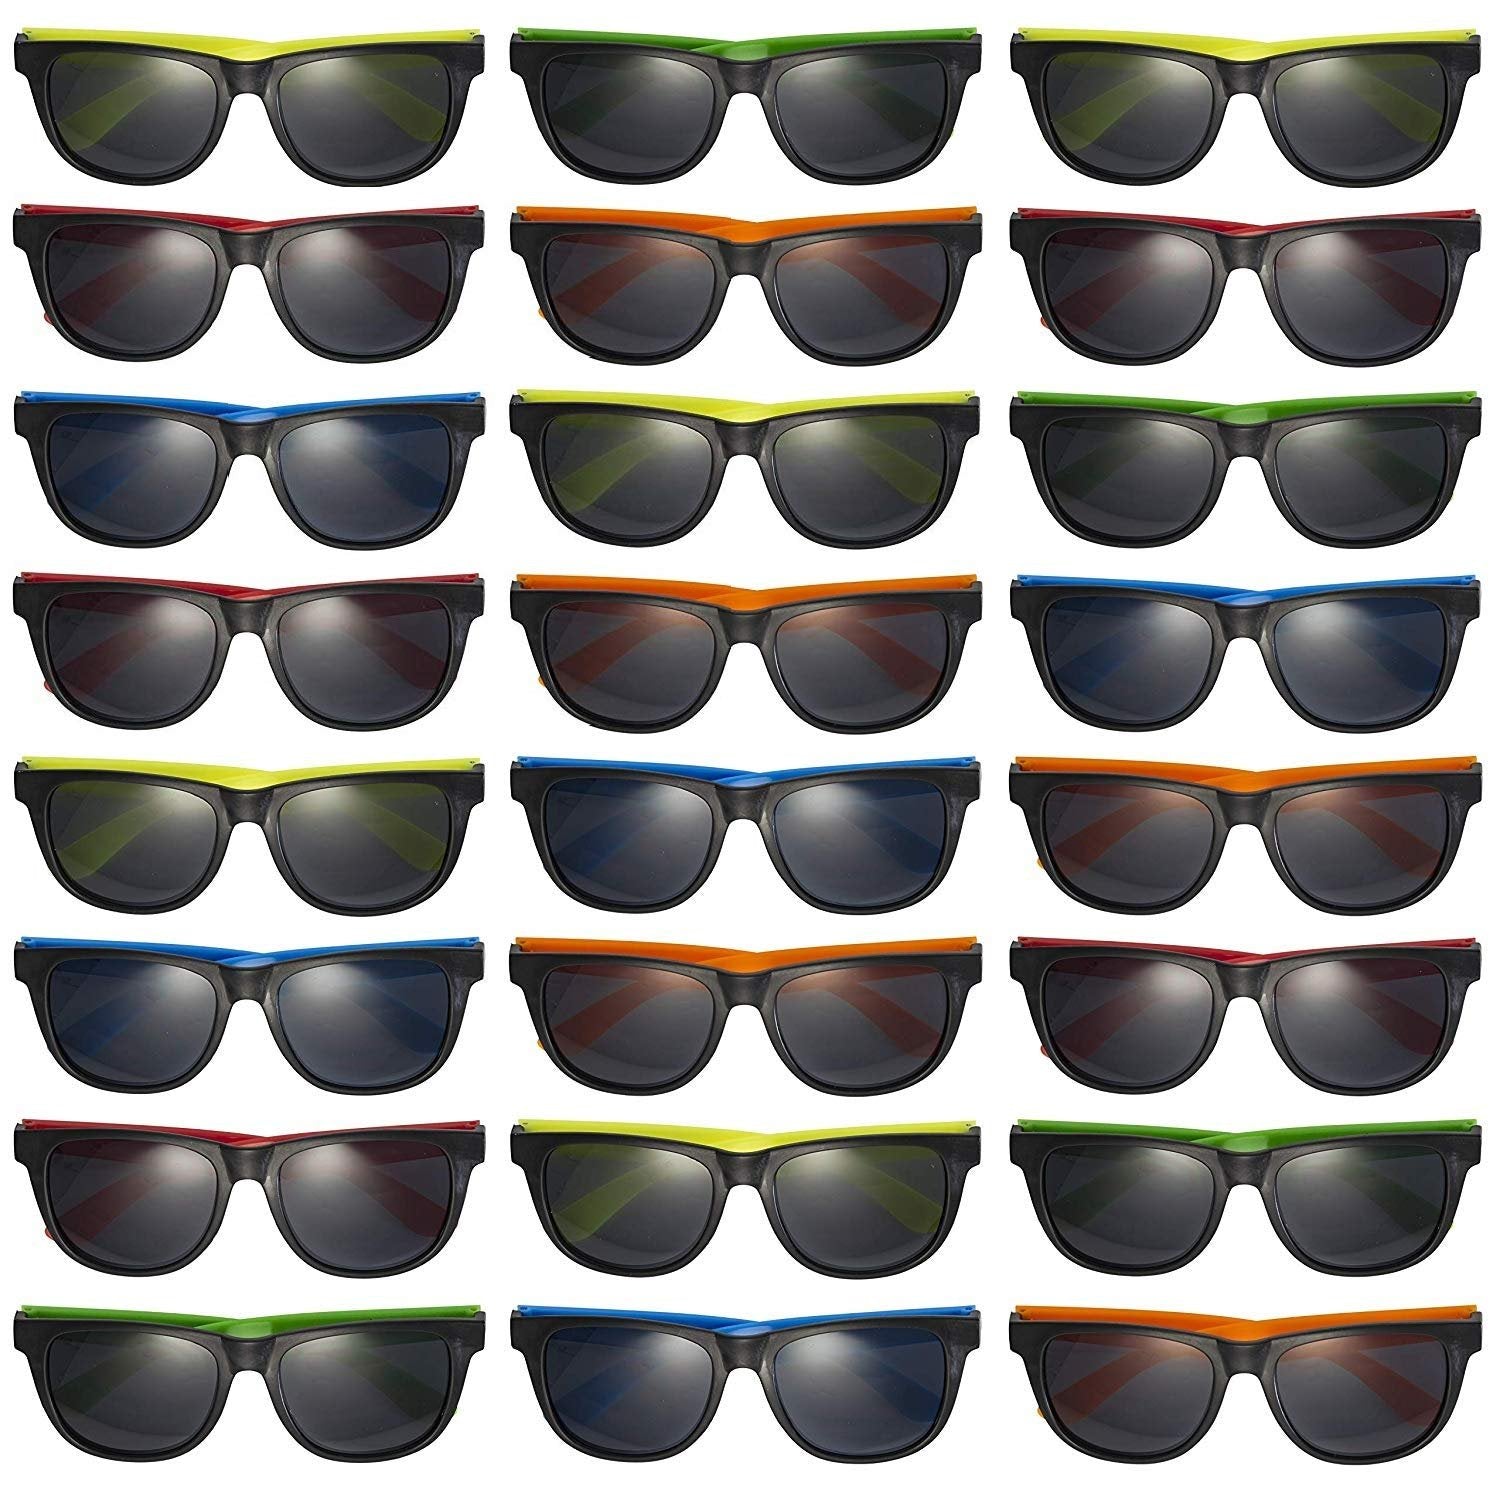 PREXTEX 25-Pack Kids Sunglasses Bulk - Neon Sunglasses - Bulk Sunglasses for Kids - Perfect Kids Party Favors for Summer, Beach Party - Bulk Kids Summer Glasses for Kids and Adults